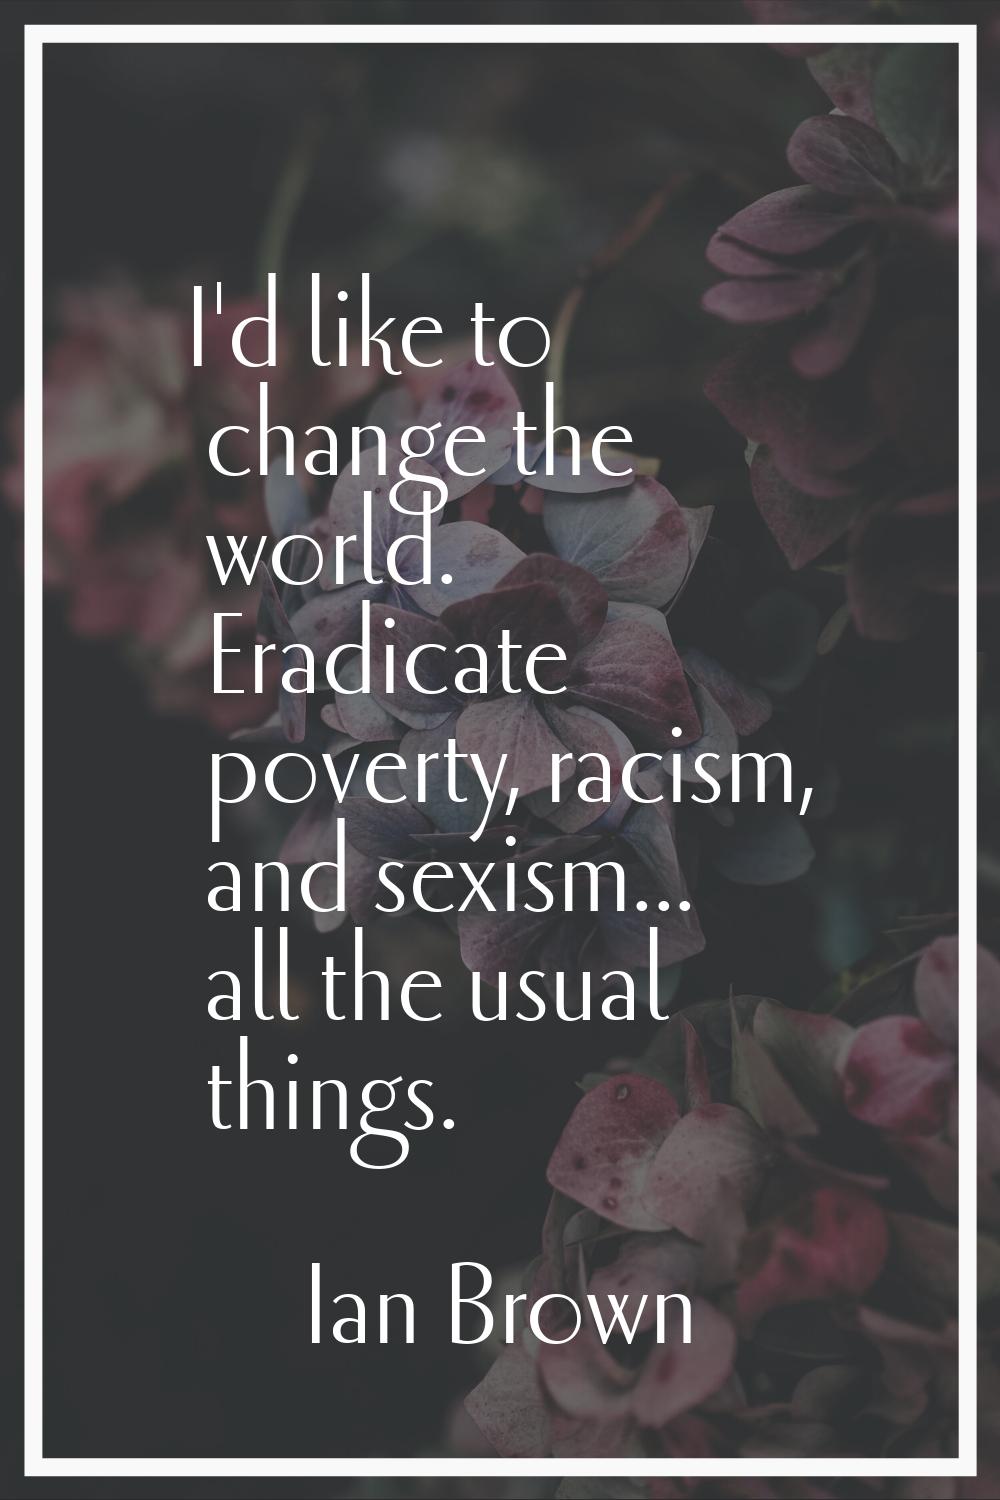 I'd like to change the world. Eradicate poverty, racism, and sexism... all the usual things.